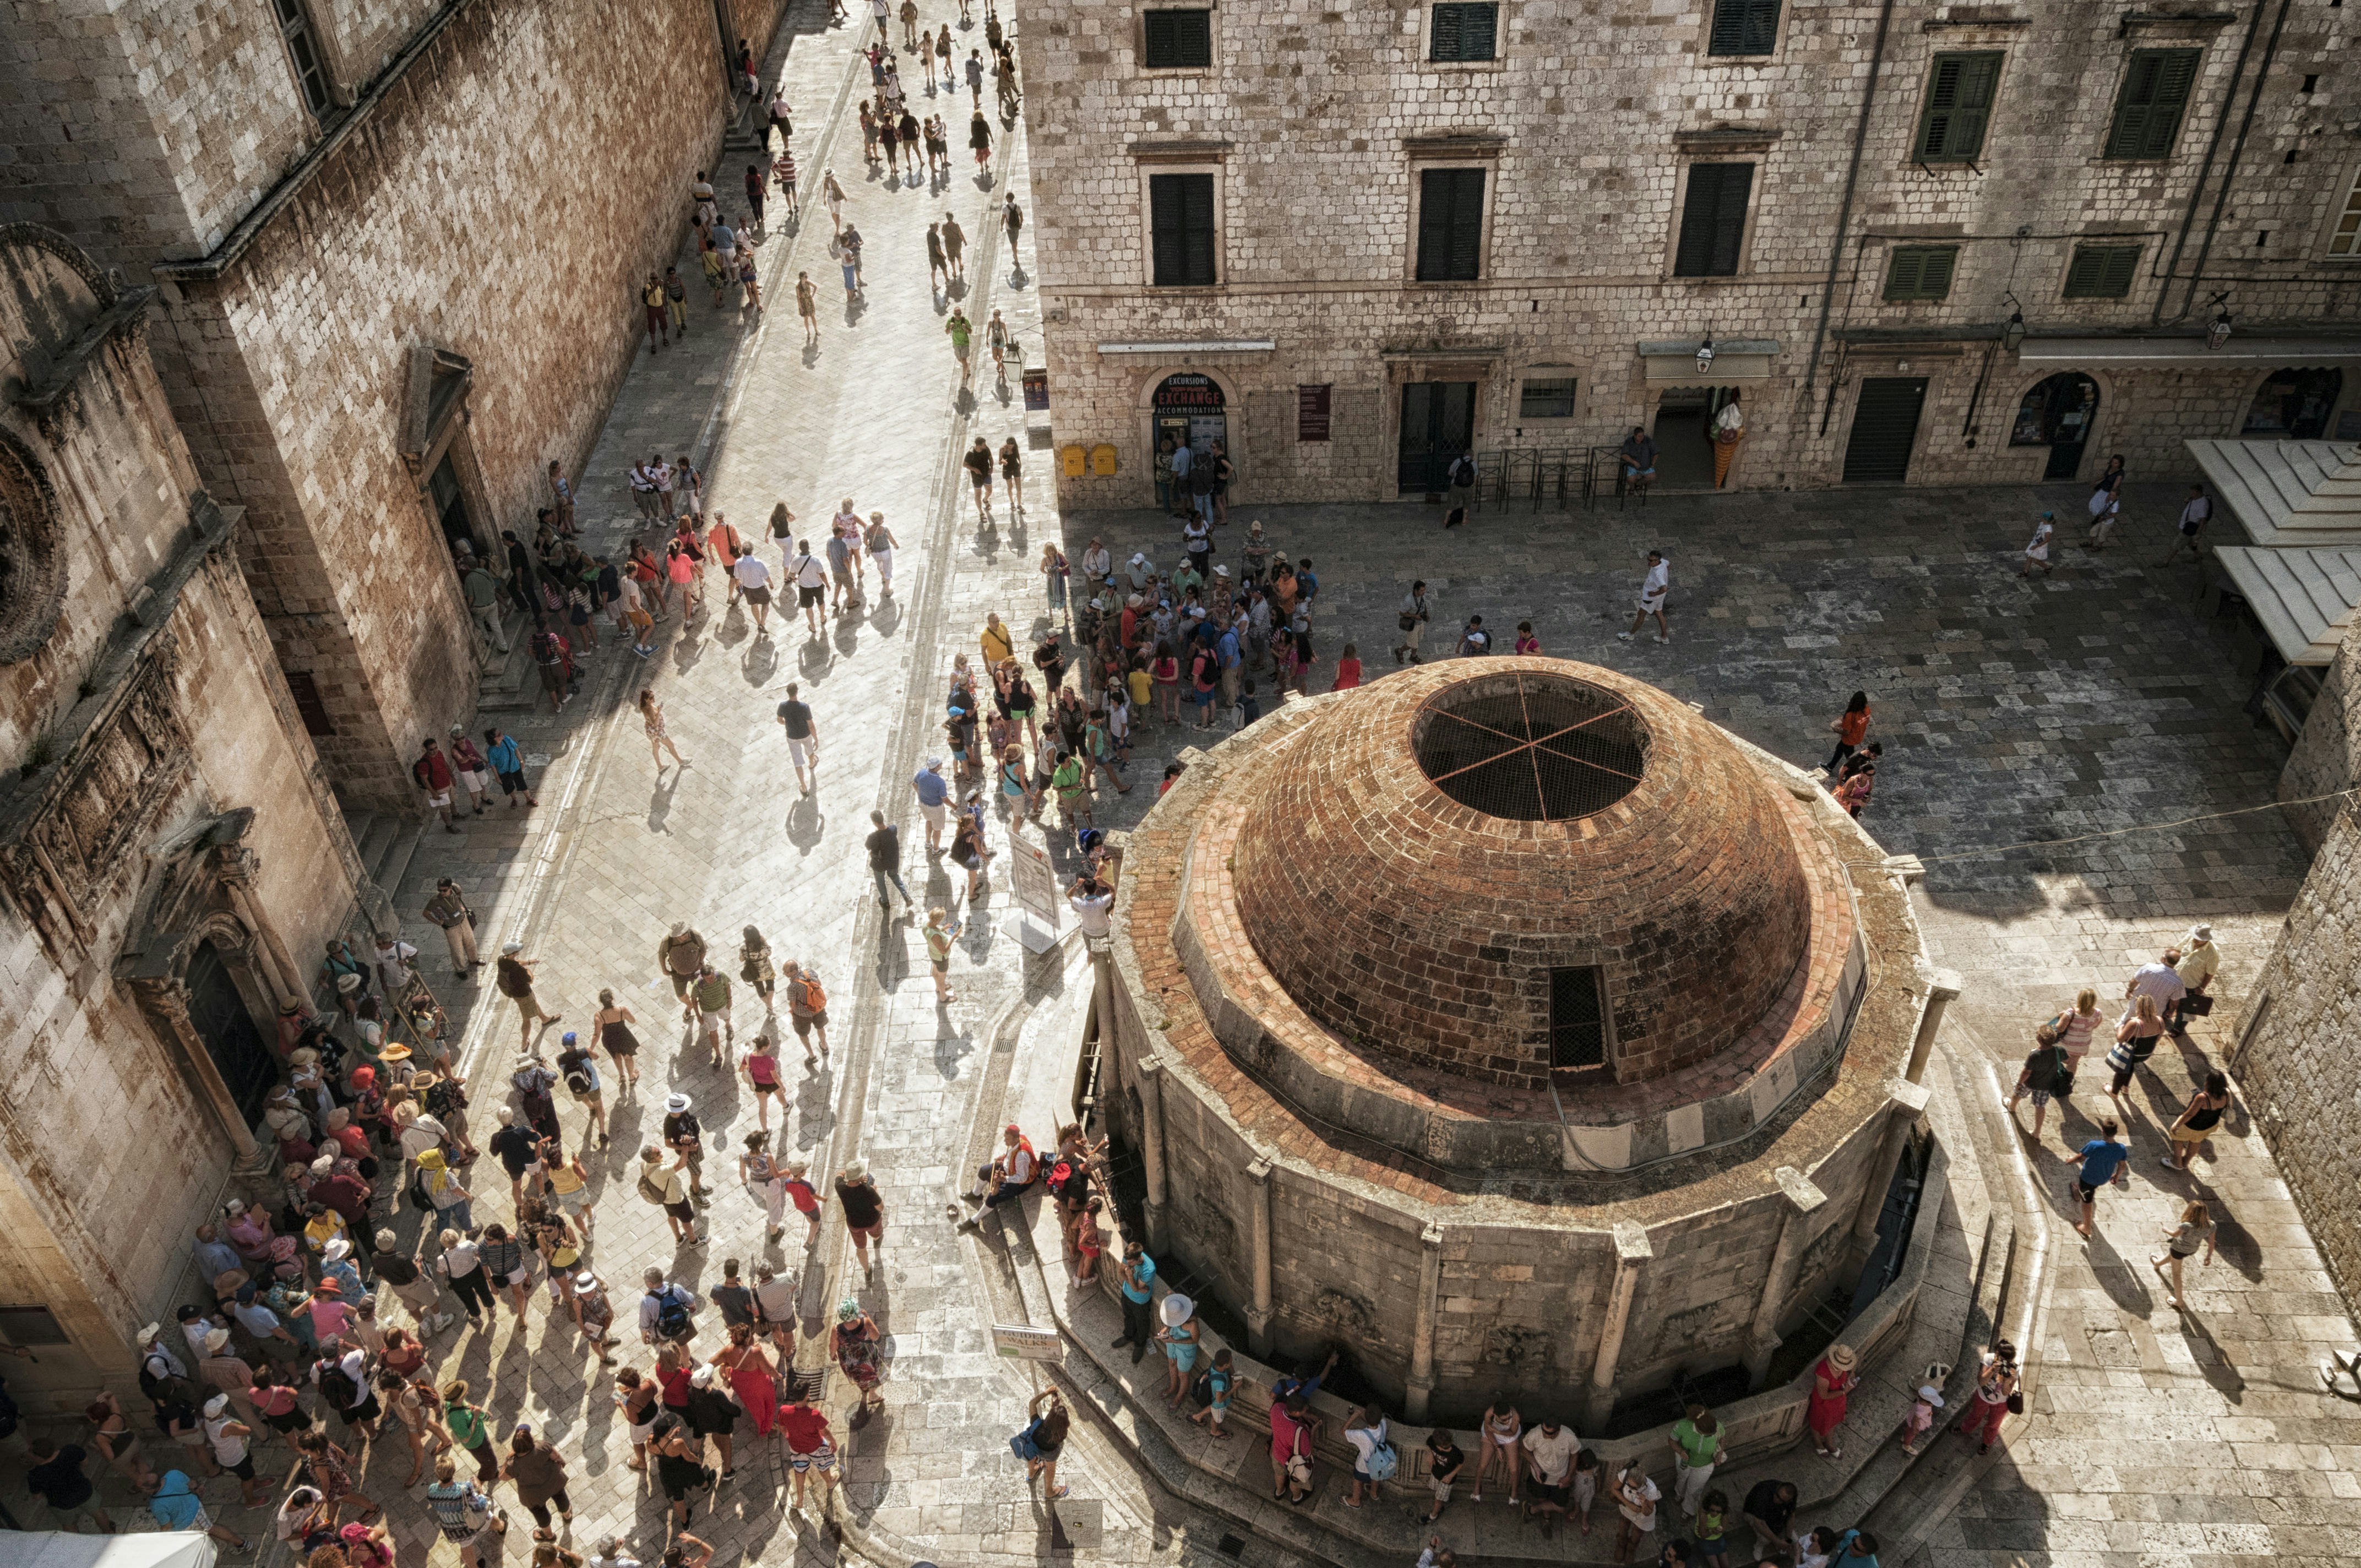 A high-angled shot of colourful crowds of tourists walking through the streets of Dubrovnik's Old Town, which struggles with overtourism issues.